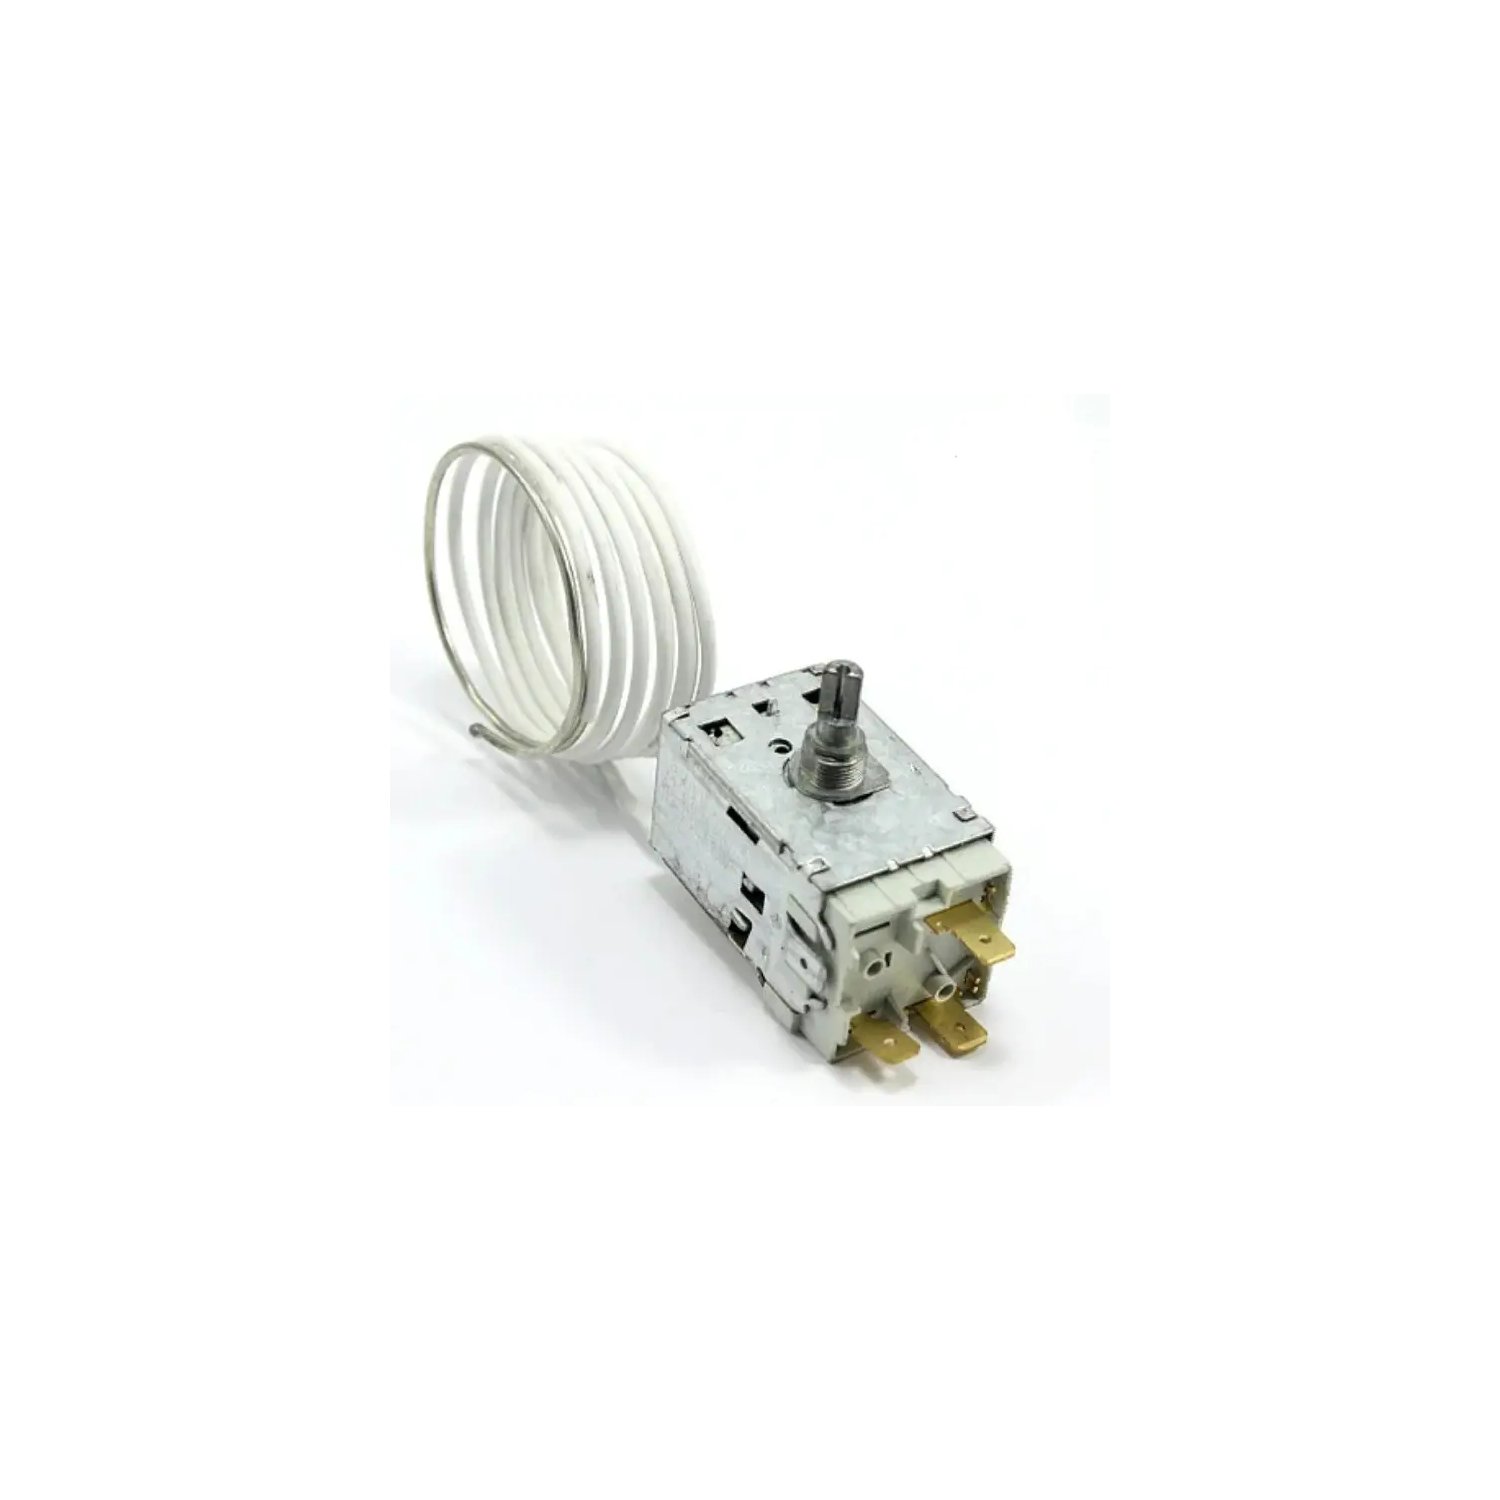 Thermostat Atea A13-0014 for CANDY / HOOVER refrigerator, Max + 5 ° C / -27.5 ° C - Min + 5 ° C / -14 ° C, L 1100 mm